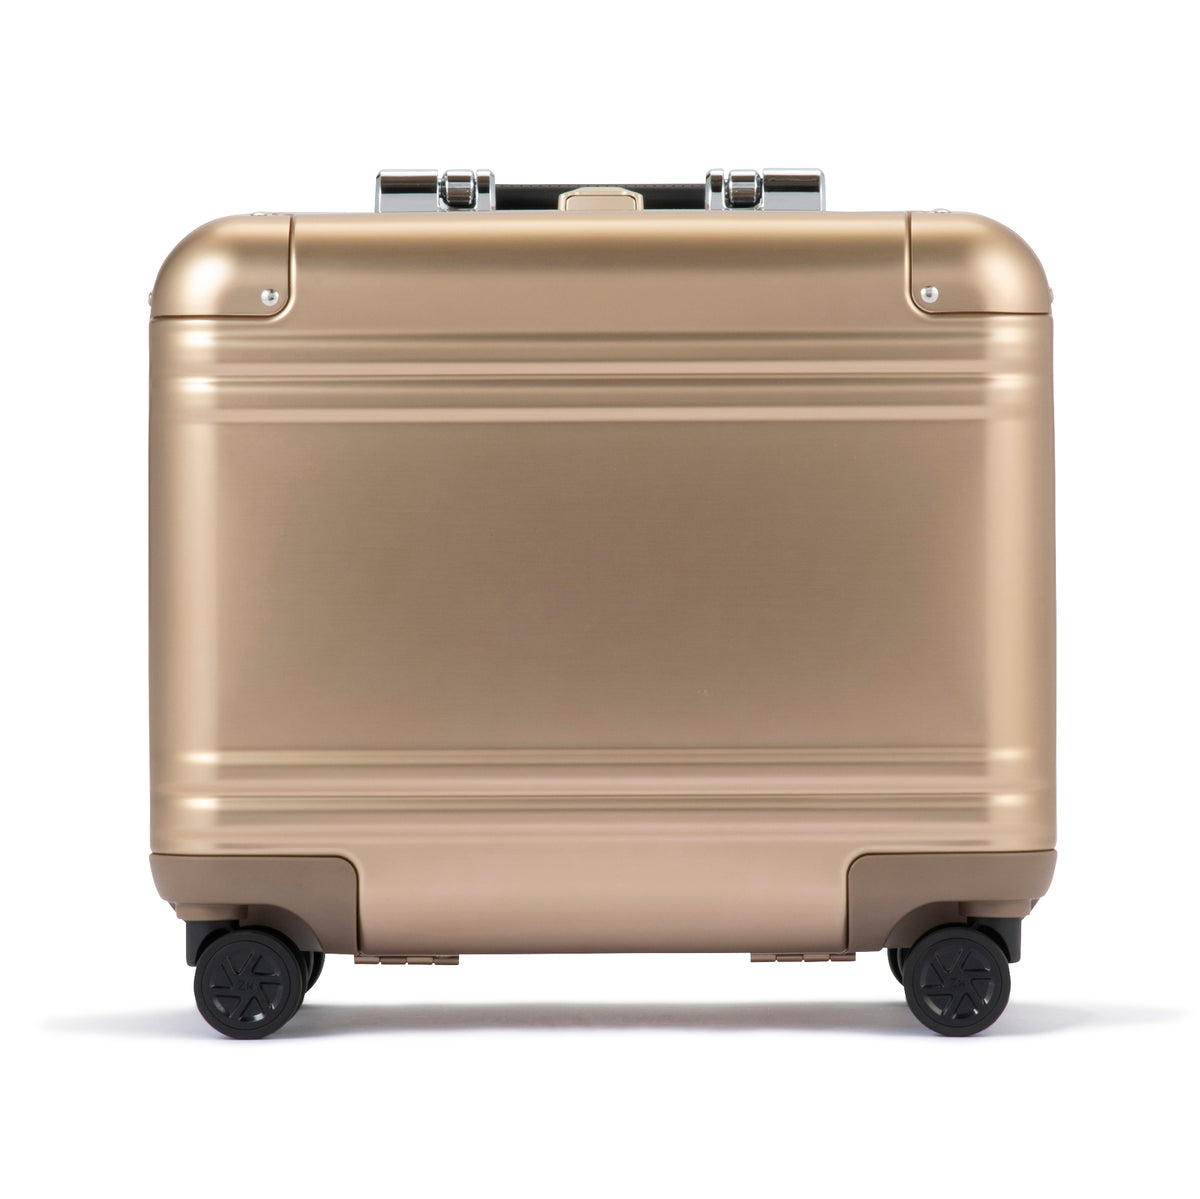 Carry-On Luggage – Rolling and Spinner Suitcases– ZERO HALLIBURTON